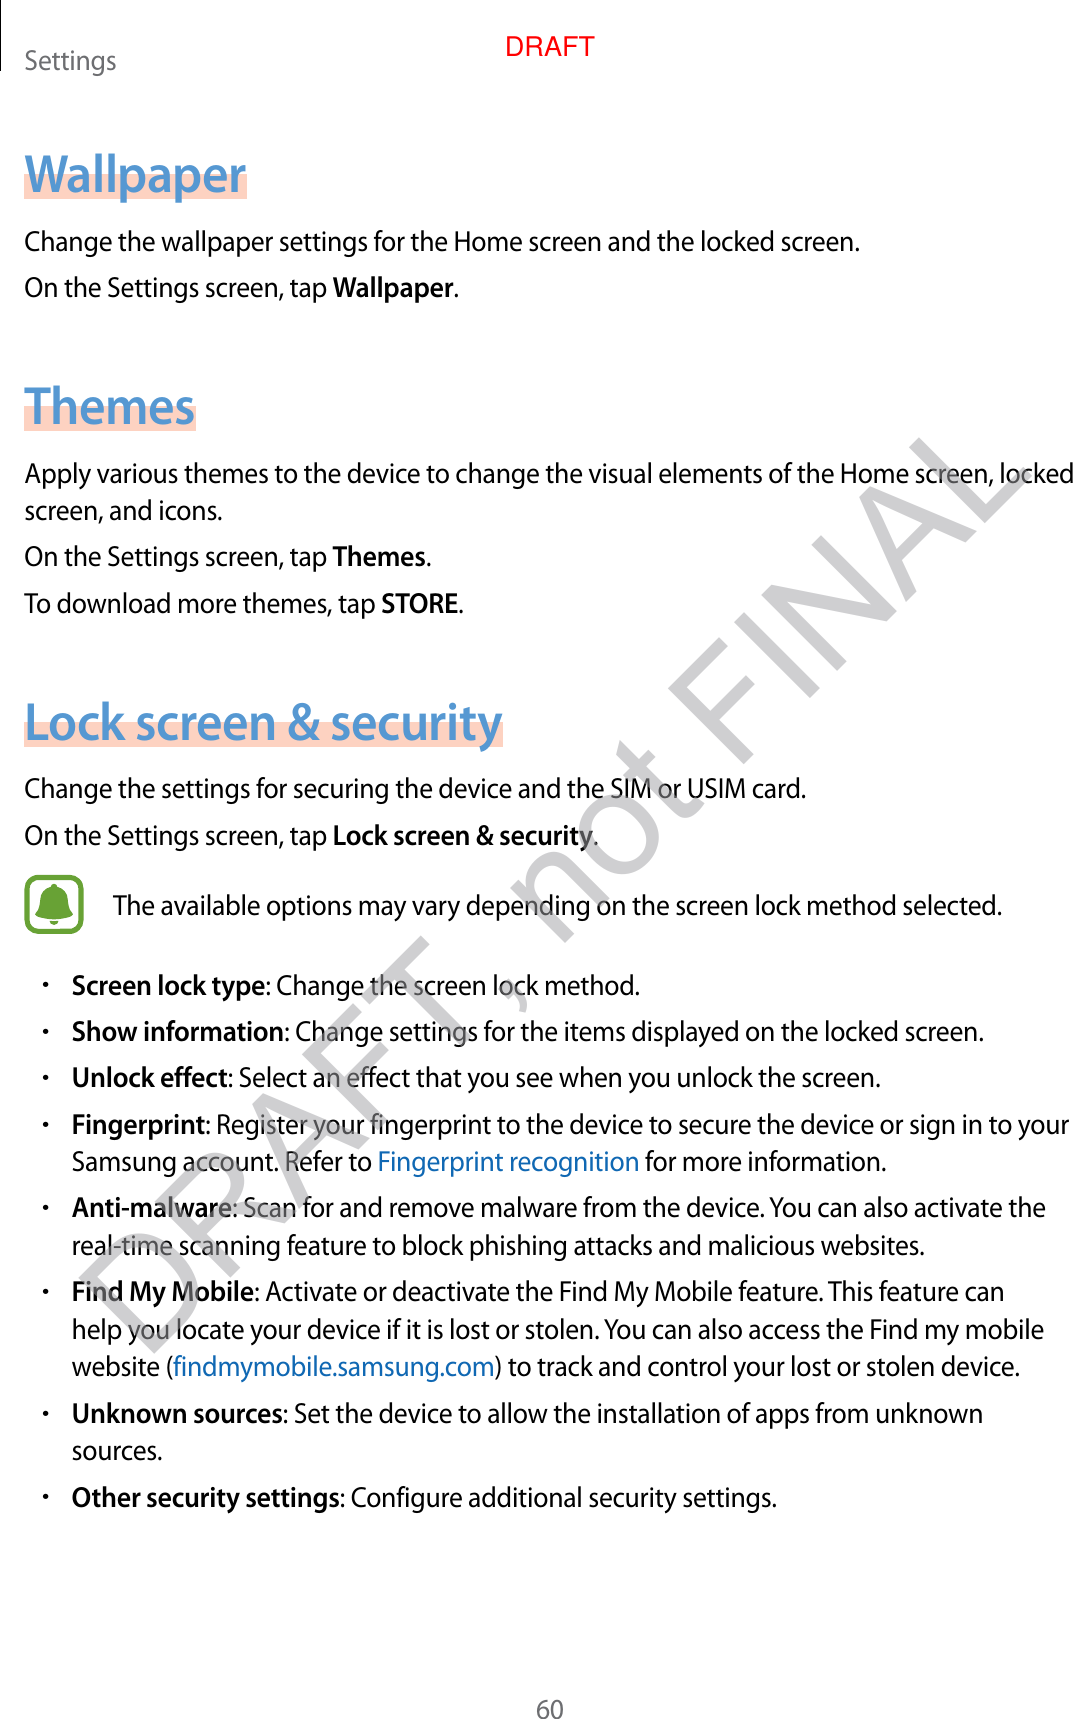 Settings60WallpaperChange the wallpaper settings for the Home screen and the locked screen.On the Settings screen, tap Wallpaper.ThemesApply various themes to the device to change the visual elements of the Home screen, locked screen, and icons.On the Settings screen, tap Themes.To download more themes, tap STORE.Lock screen &amp; securityChange the settings for securing the device and the SIM or USIM card.On the Settings screen, tap Lock screen &amp; security.The available options may vary depending on the screen lock method selected.•Screen lock type: Change the screen lock method.•Show information: Change settings for the items displayed on the locked screen.•Unlock effect: Select an effect that you see when you unlock the screen.•Fingerprint: Register your fingerprint to the device to secure the device or sign in to your Samsung account. Refer to Fingerprint recognition for more information.•Anti-malware: Scan for and remove malware from the device. You can also activate the real-time scanning feature to block phishing attacks and malicious websites.•Find My Mobile: Activate or deactivate the Find My Mobile feature. This feature can help you locate your device if it is lost or stolen. You can also access the Find my mobile website (findmymobile.samsung.com) to track and control your lost or stolen device.•Unknown sources: Set the device to allow the installation of apps from unknown sources.•Other security settings: Configure additional security settings.DRAFT, not FINALDRAFT